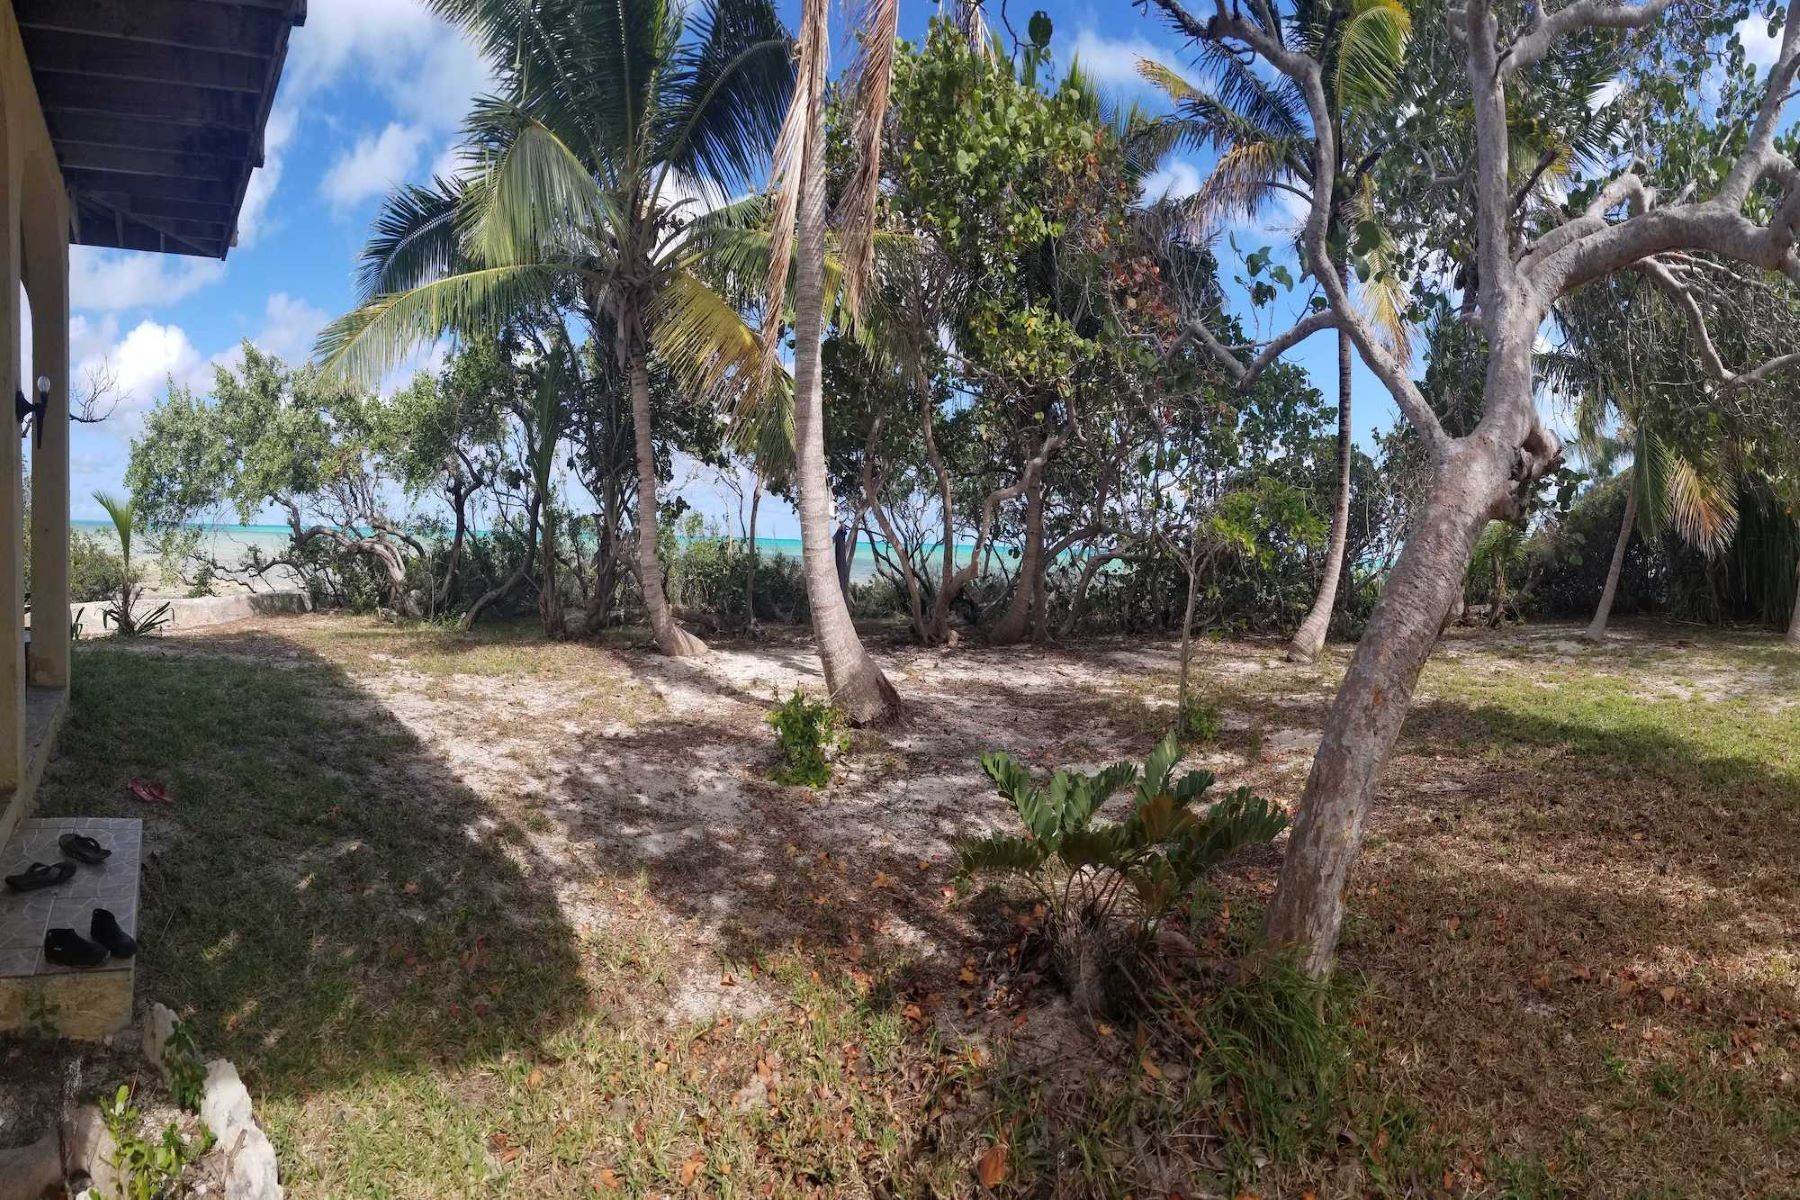 10. Private Islands for Sale at Swain's Cay, Private Island off Andros Mangrove Cay, Andros Bahamas